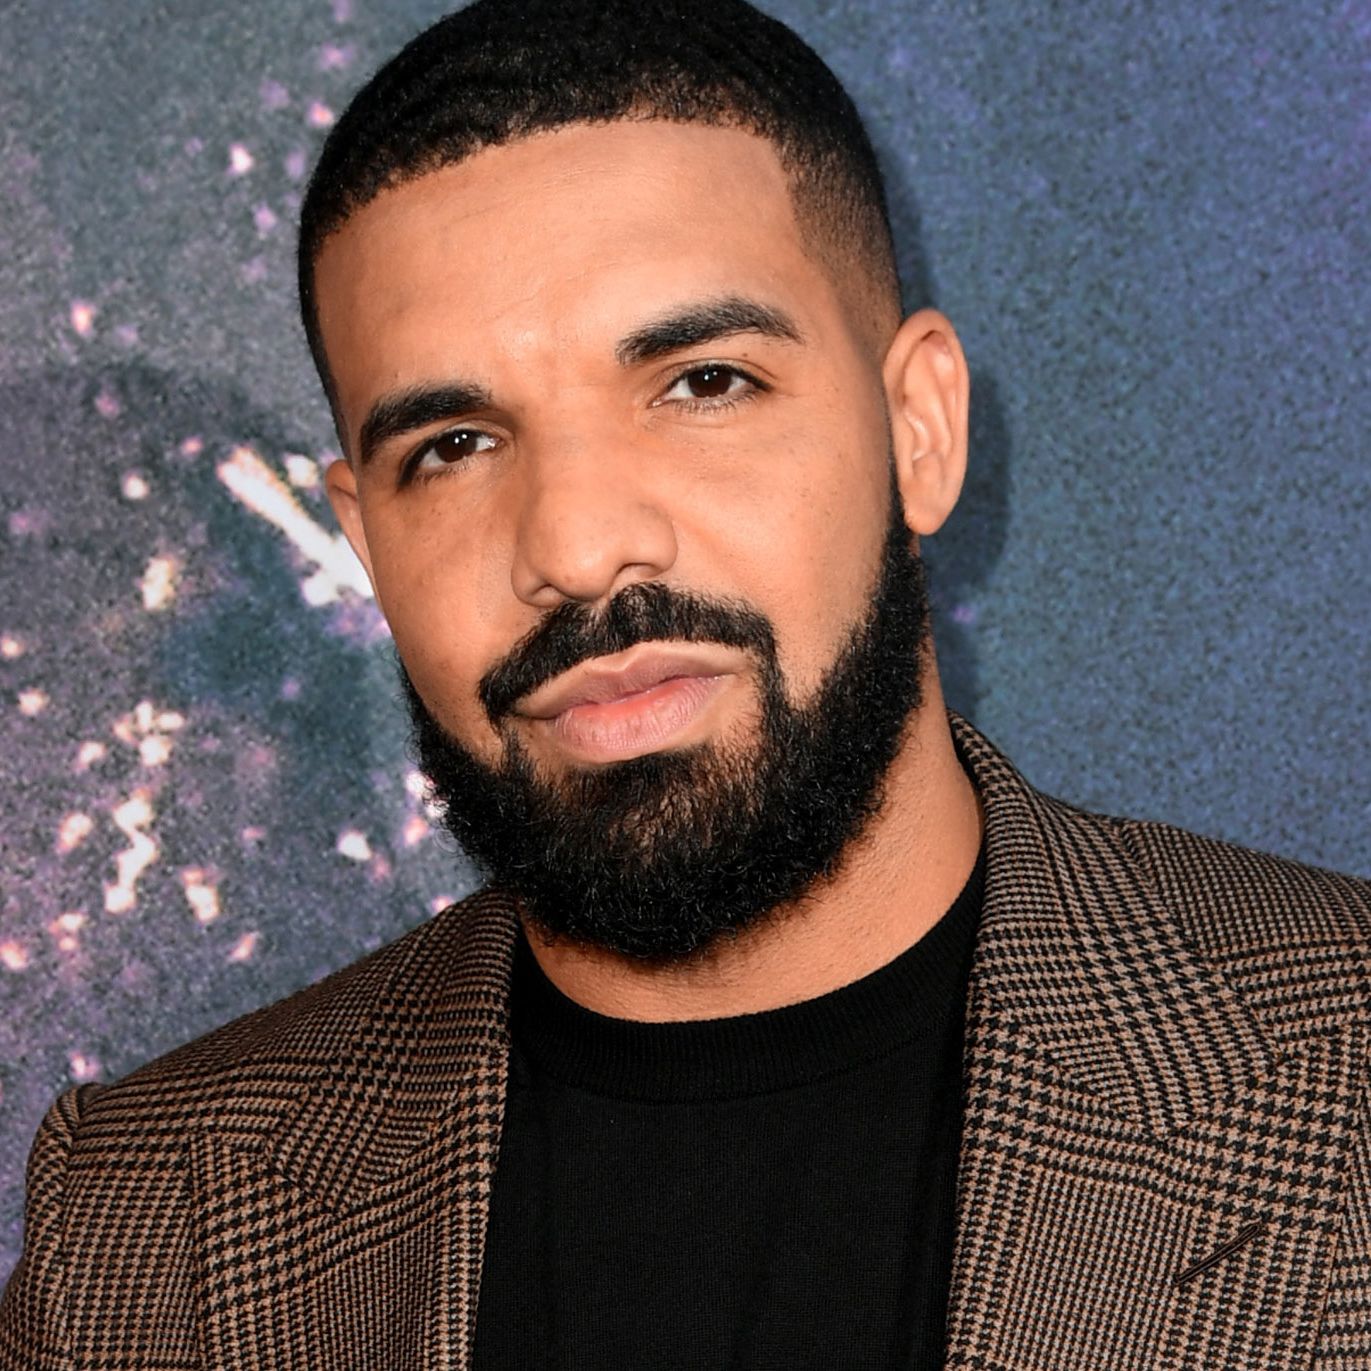 Drake Long Porn - Drake shares first pictures of his son, Adonis, on Instagram | CNN